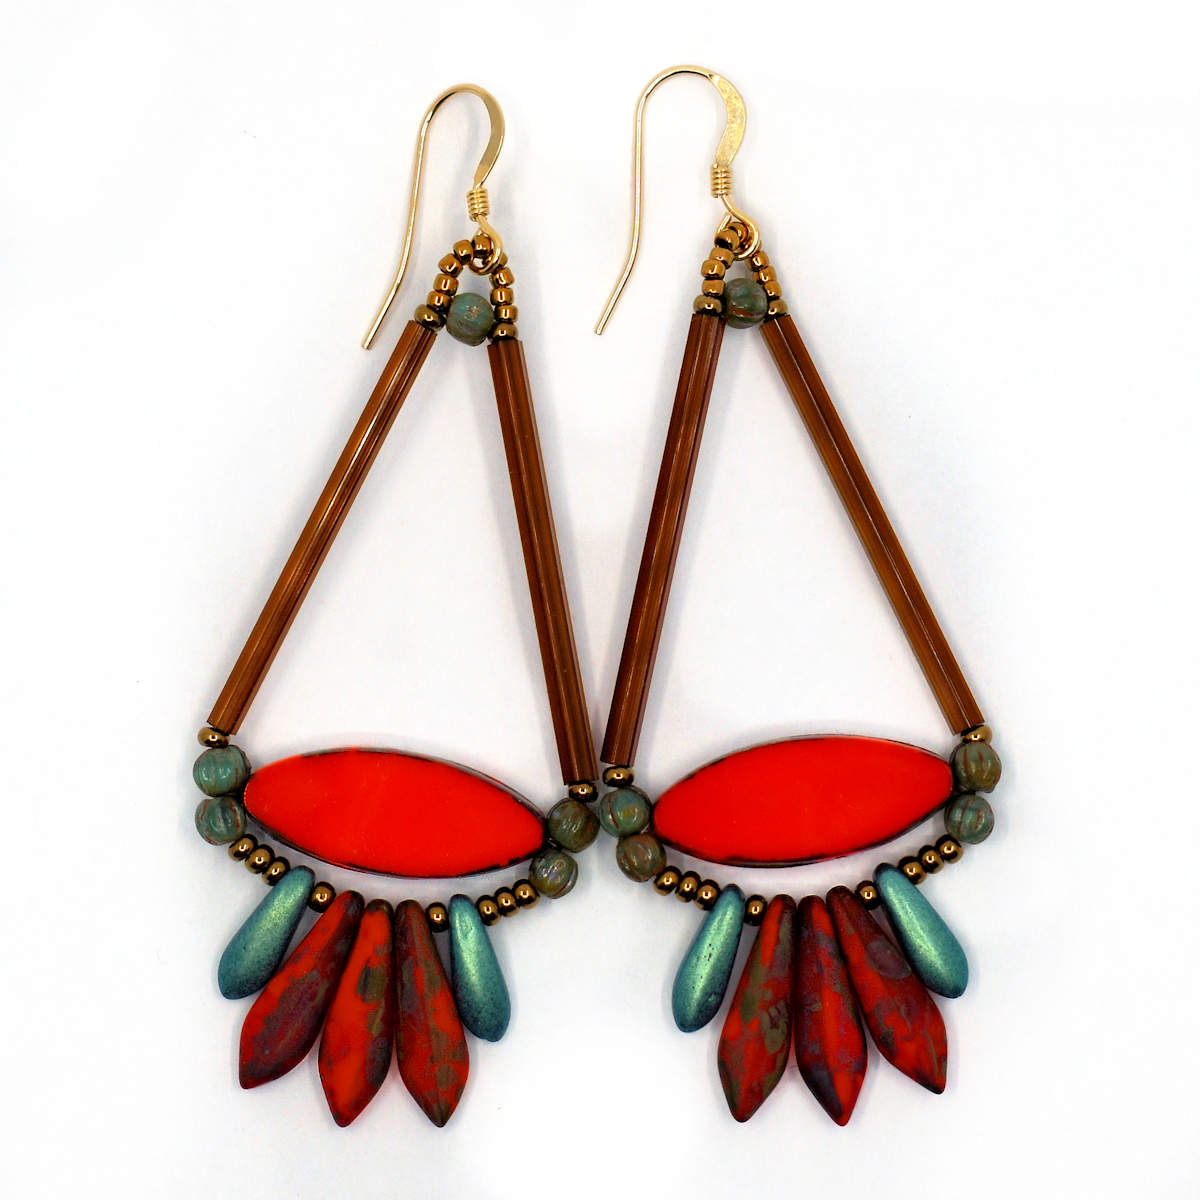 Long earrings shaped like a triangle with a curved fringe bottom lay on a white background. The earrings have two long brown tubes that form the top of the triangle shape and a narrow, pointy ended coral red oval at the bottom. Below the oval is a swag of coral red daggers with black speckles sandwiched between two smaller metallic green daggers. The earrings have gold ear wires and gold seed bead accents.